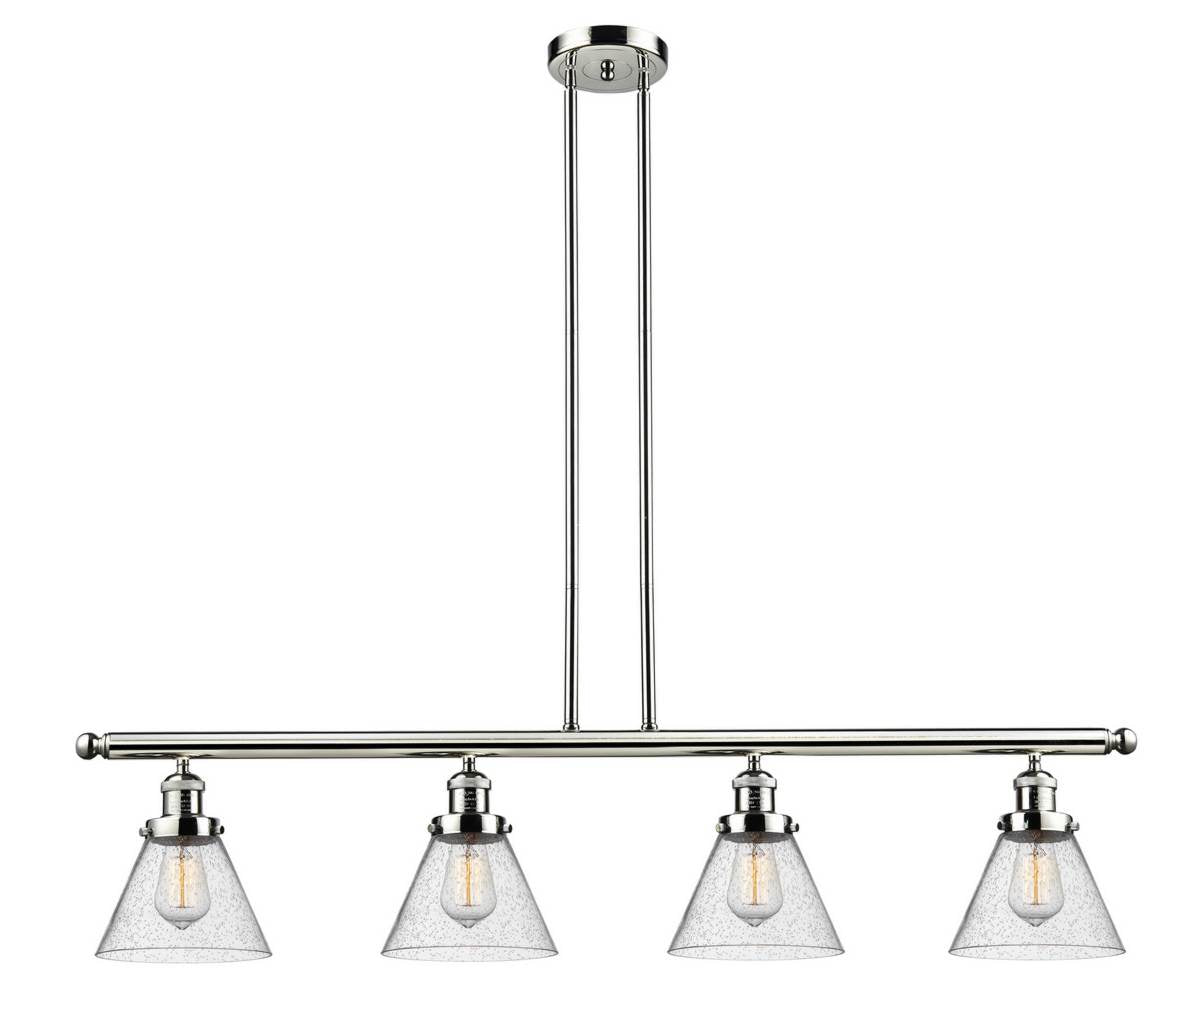 214-PN-G44 4-Light 52.375" Polished Nickel Island Light - Seedy Large Cone Glass - LED Bulb - Dimmensions: 52.375 x 7.75 x 10<br>Minimum Height : 20.25<br>Maximum Height : 44.25 - Sloped Ceiling Compatible: Yes